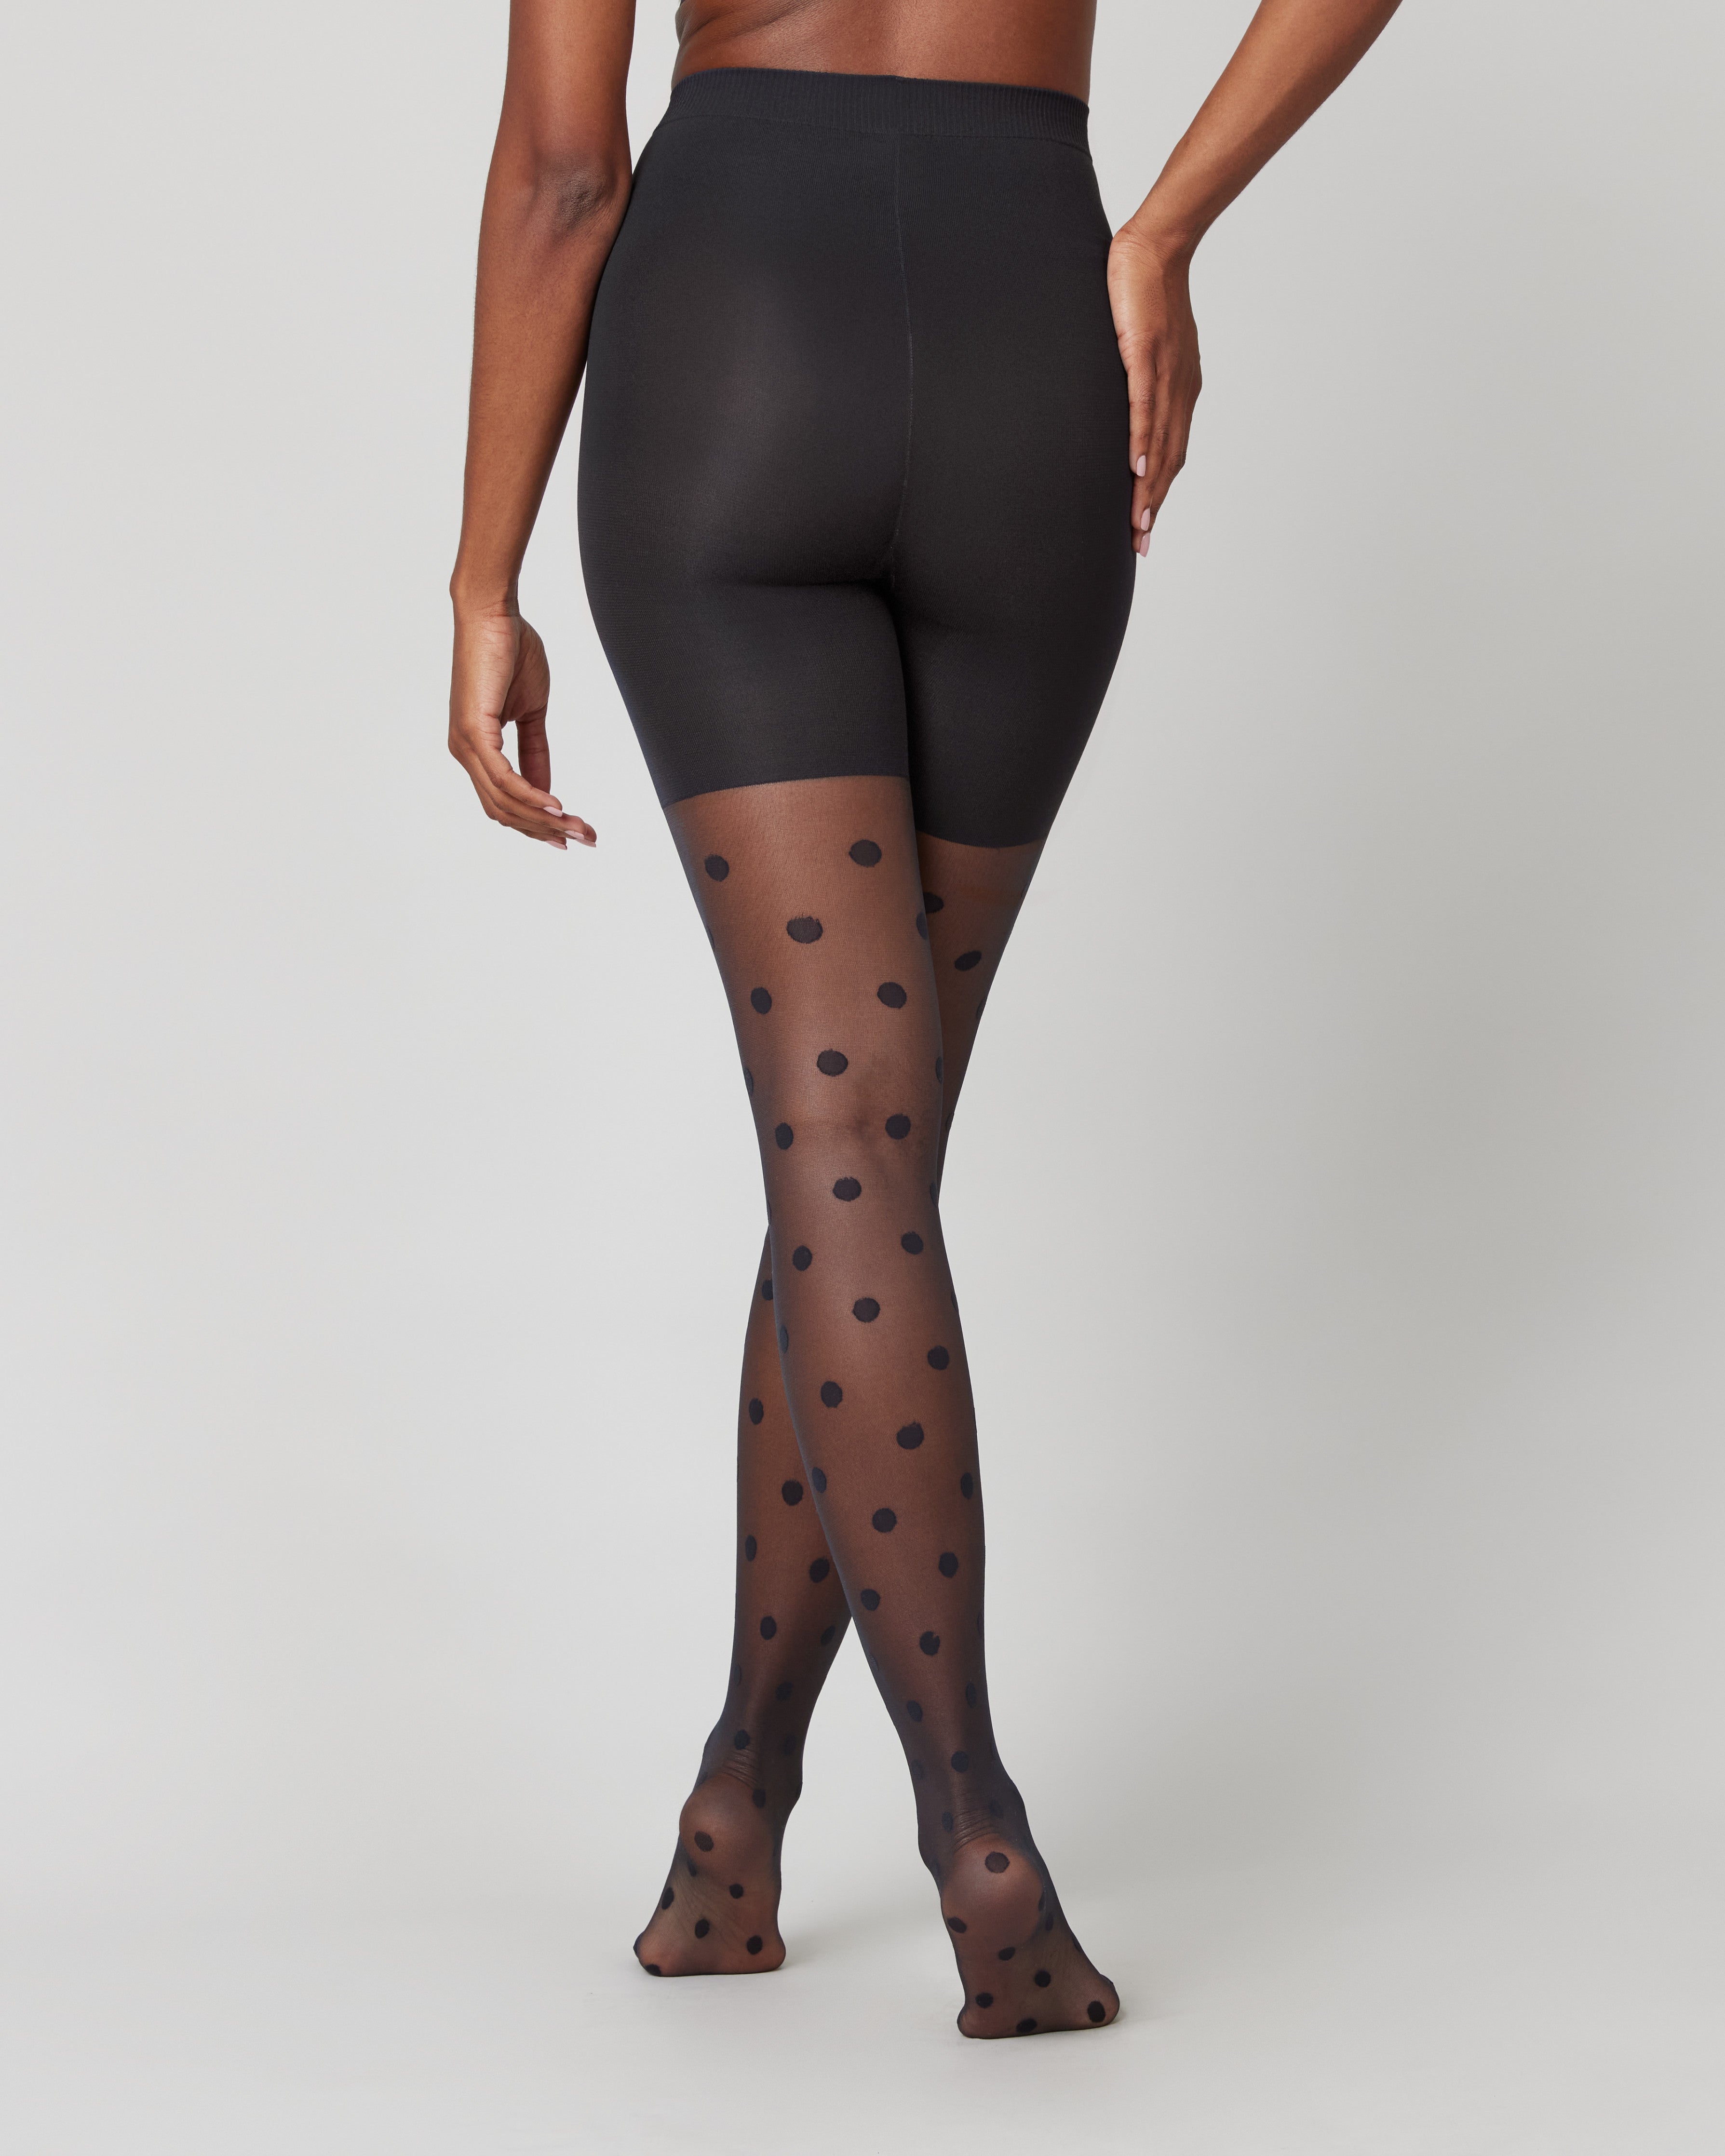 Spanx Women's End Tights Original 128, Bittersweet, A at